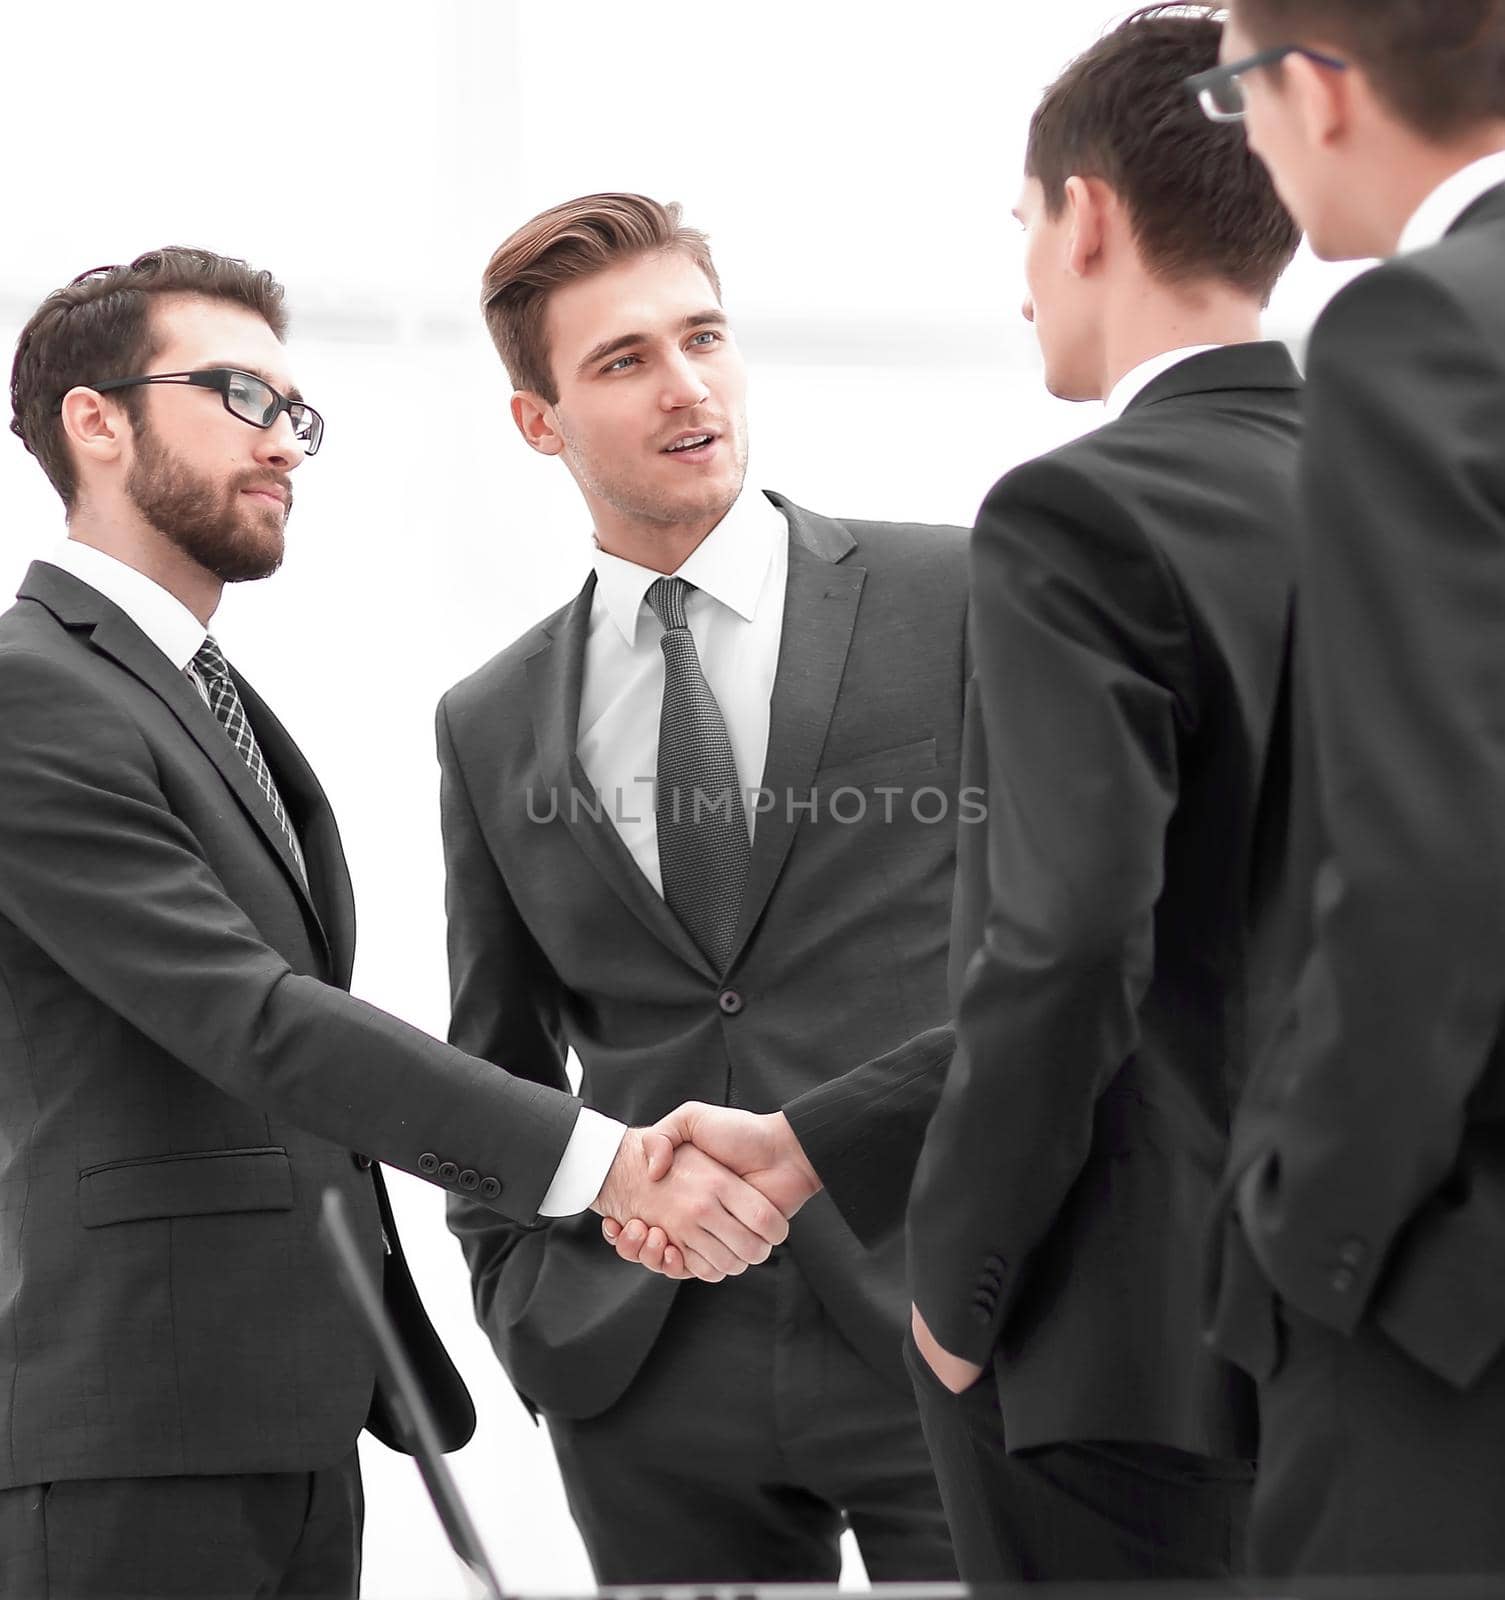 handshake of business people.photo with copy space.